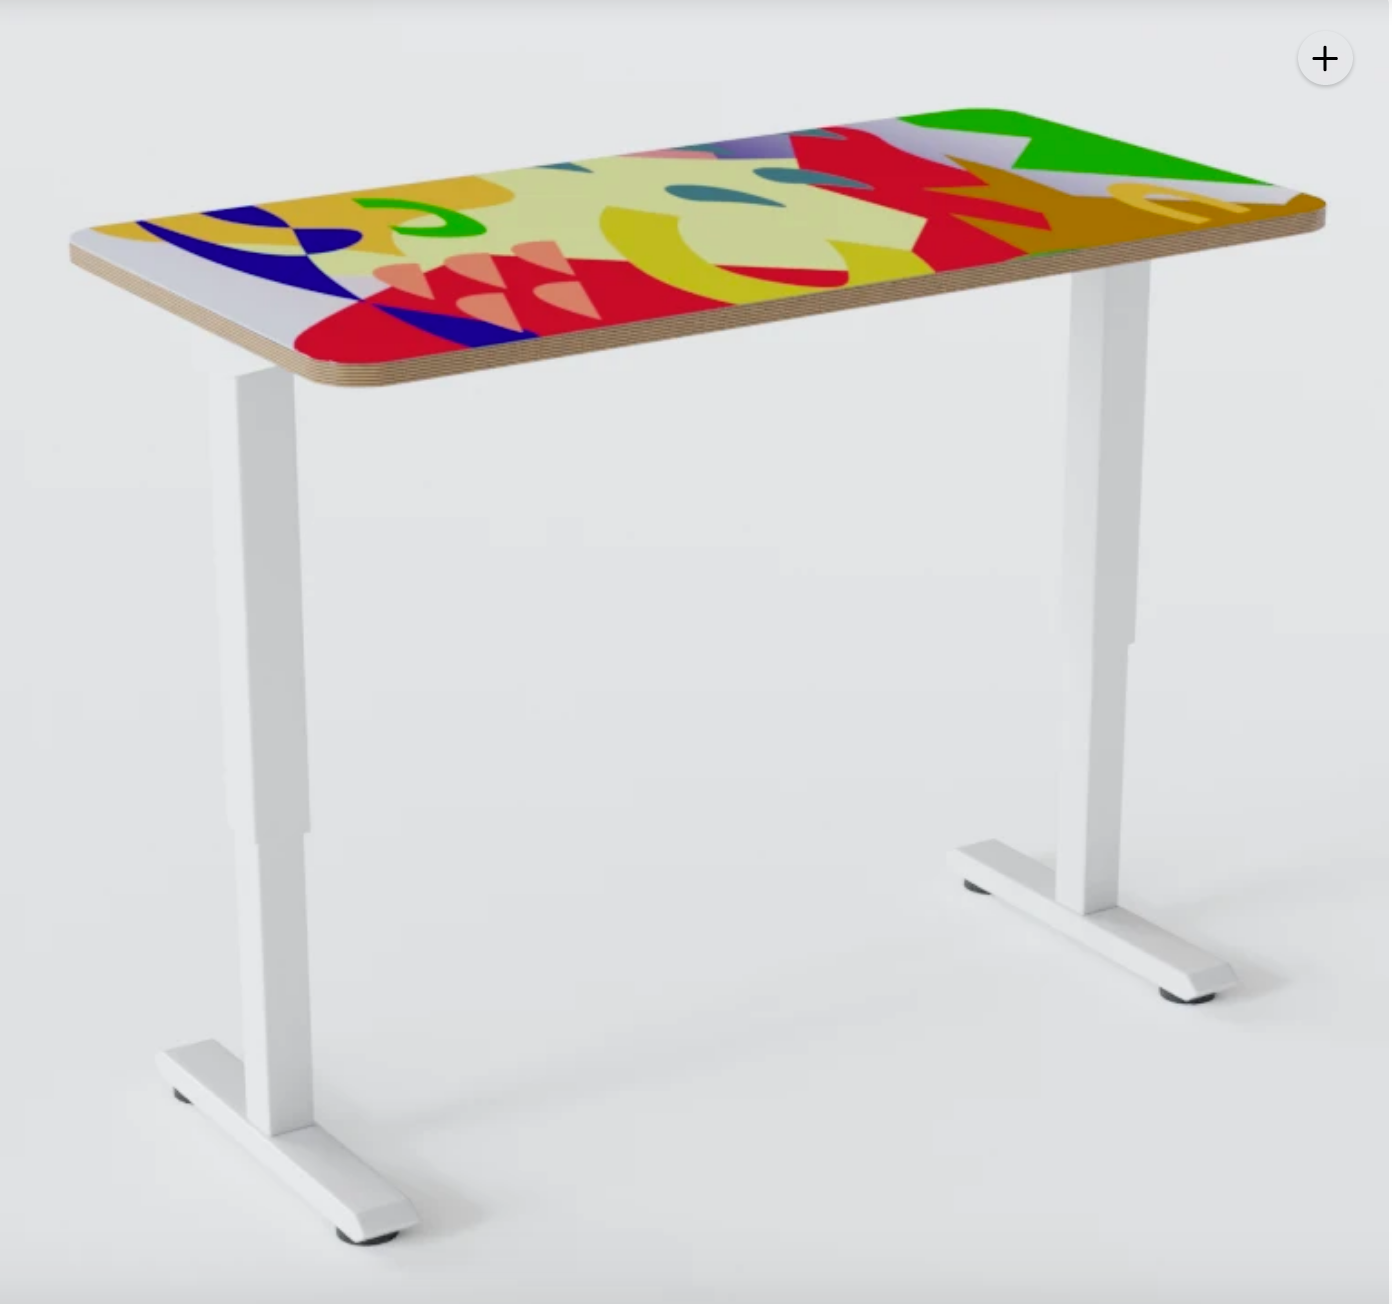 A super-colorful Play Standing Desk from Chassie.